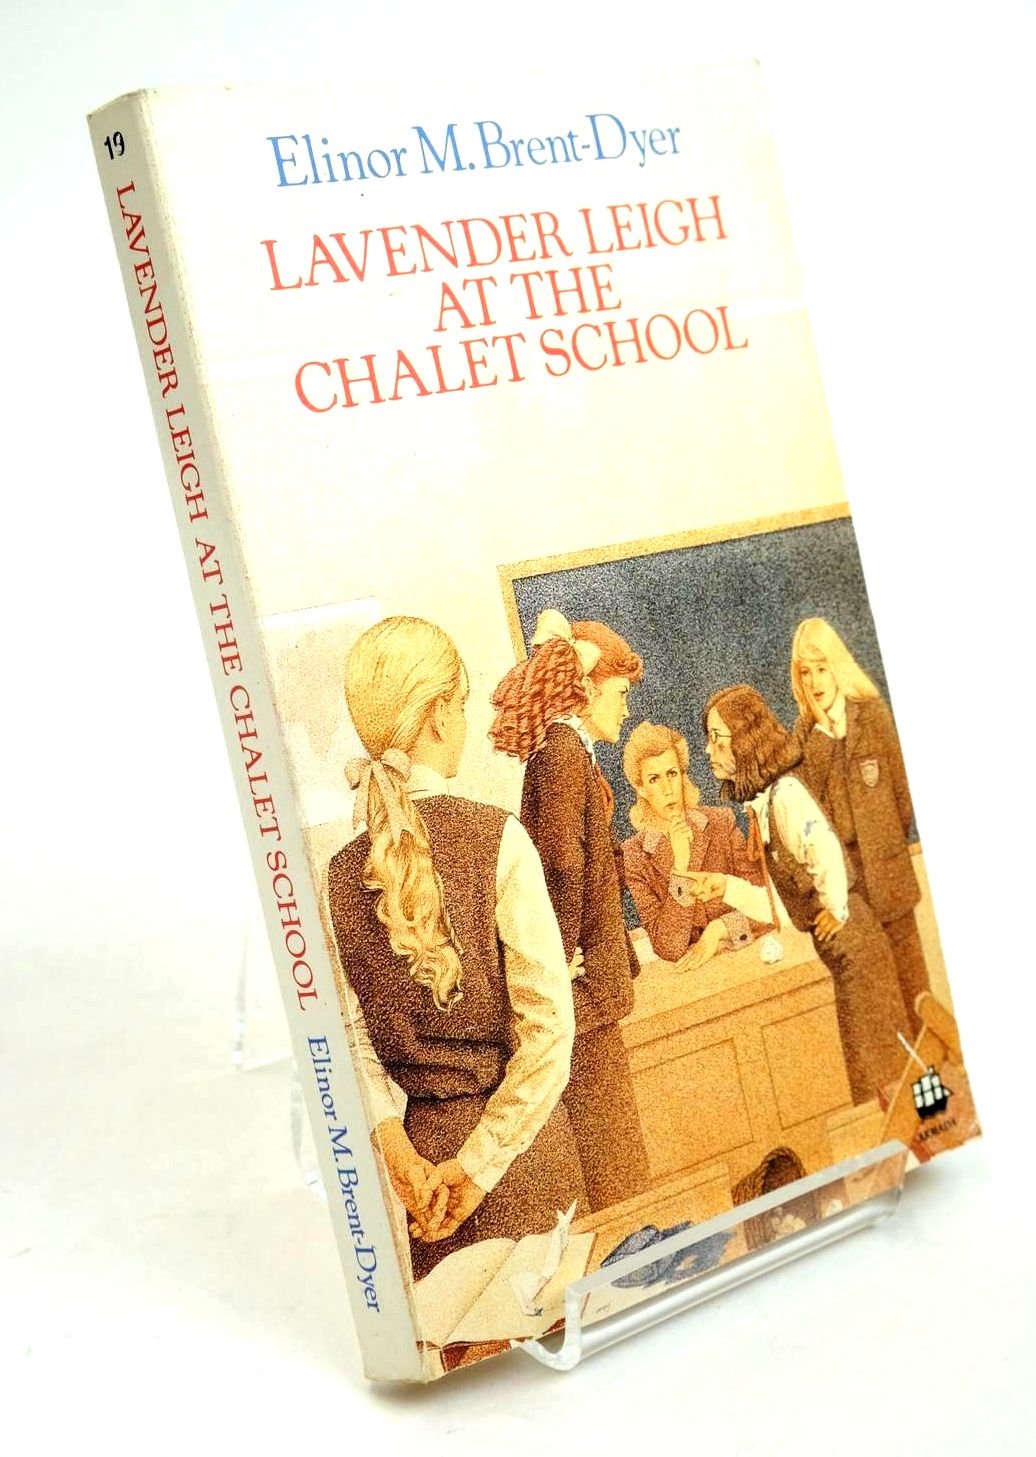 Photo of LAVENDER LEIGH AT THE CHALET SCHOOL written by Brent-Dyer, Elinor M. published by Armada (STOCK CODE: 1321852)  for sale by Stella & Rose's Books